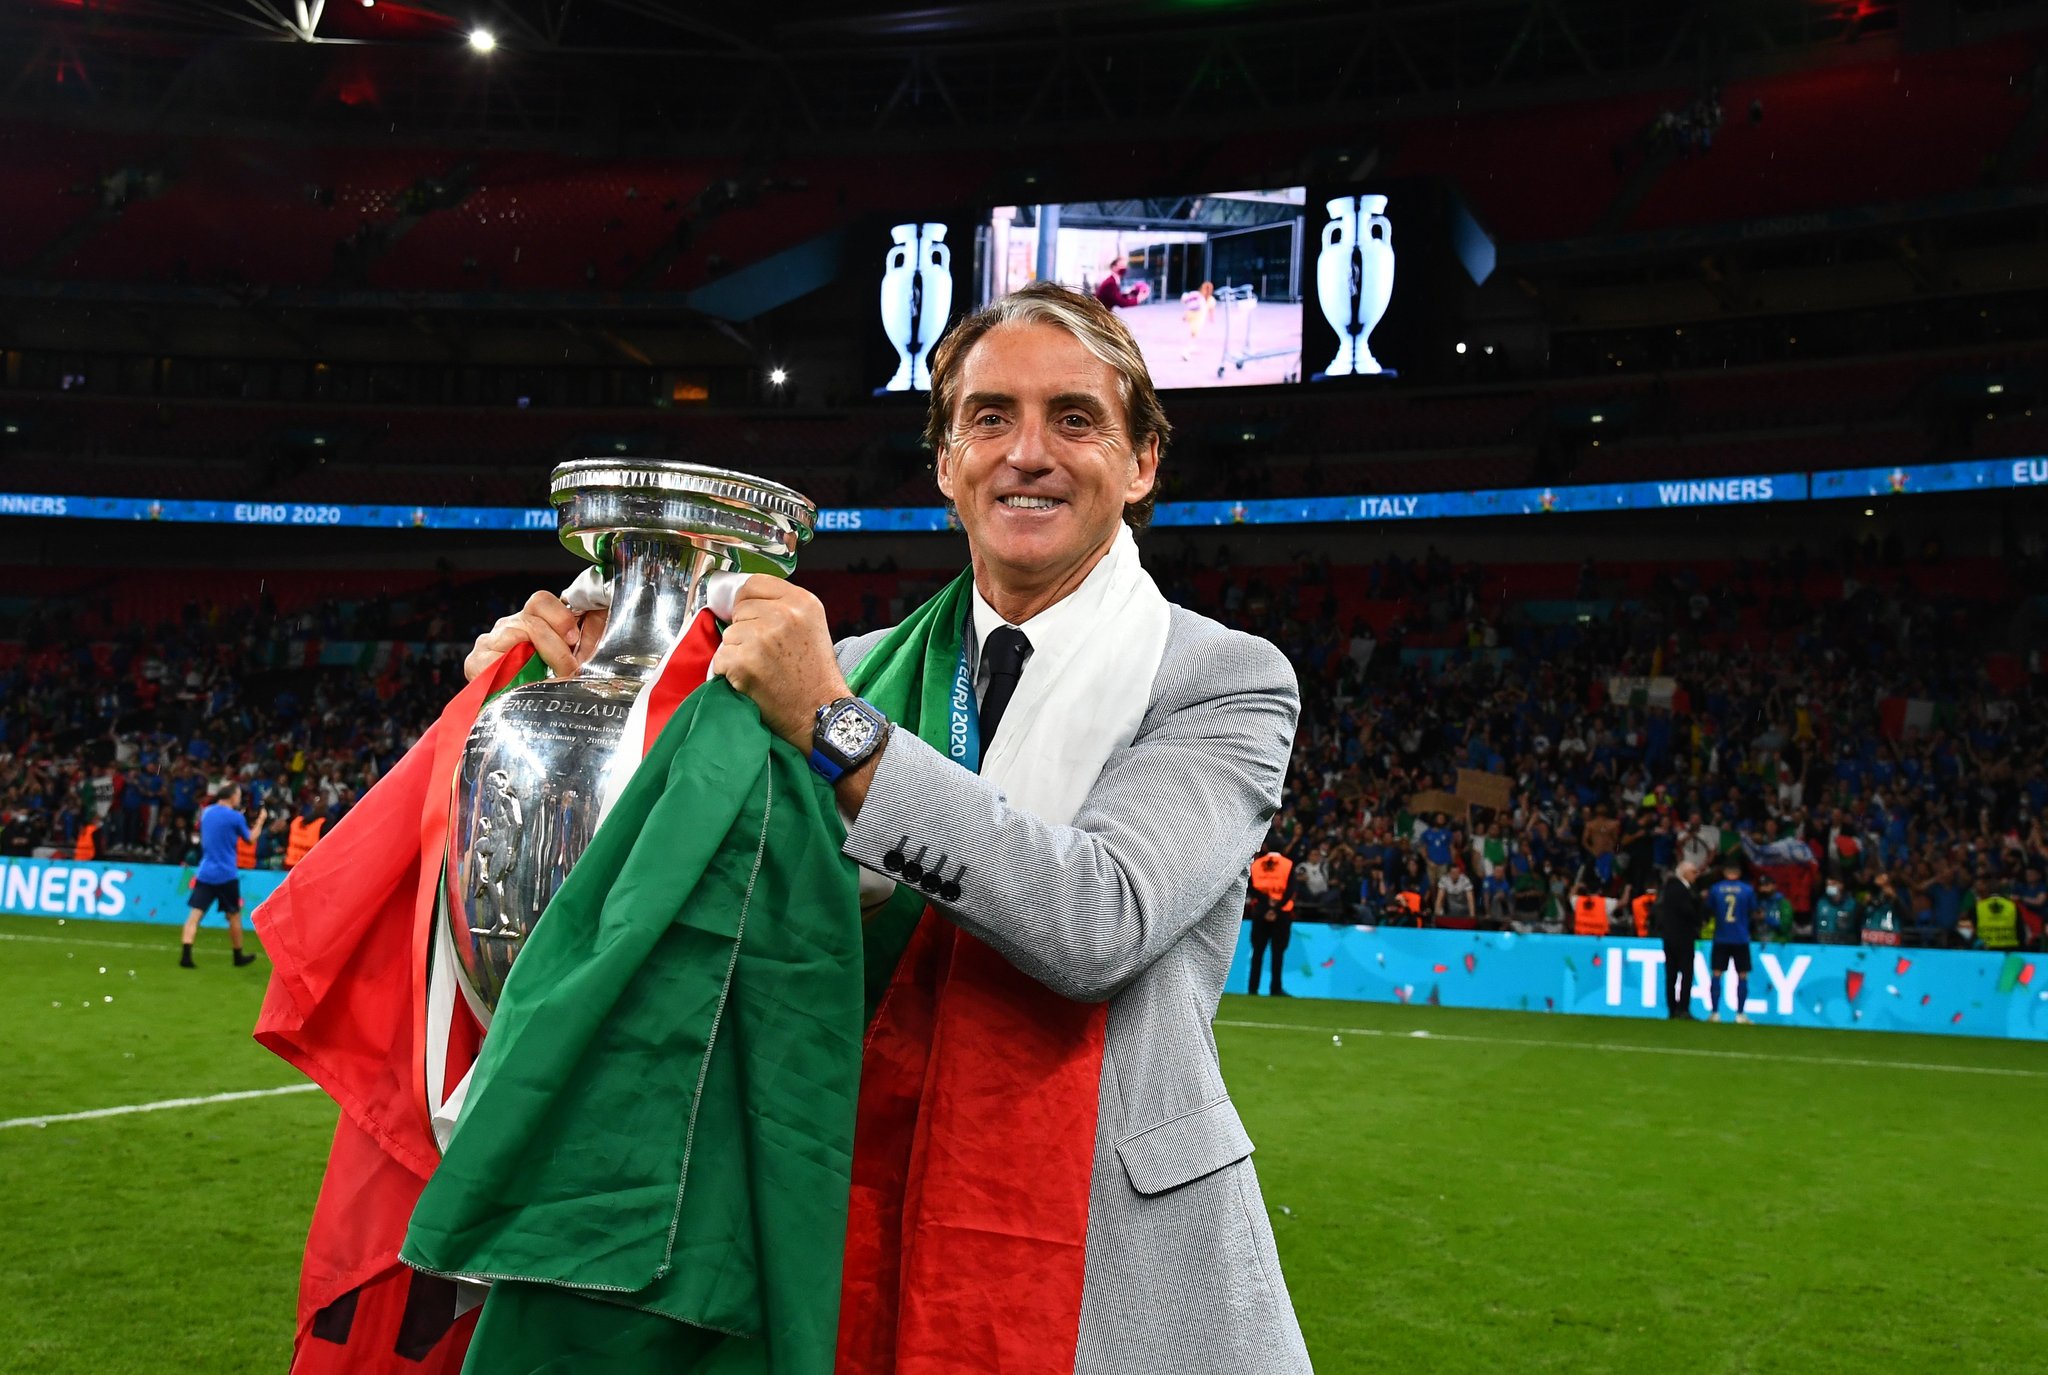 We'll book our place in World Cup and win tournament too, proclaims Roberto Mancini